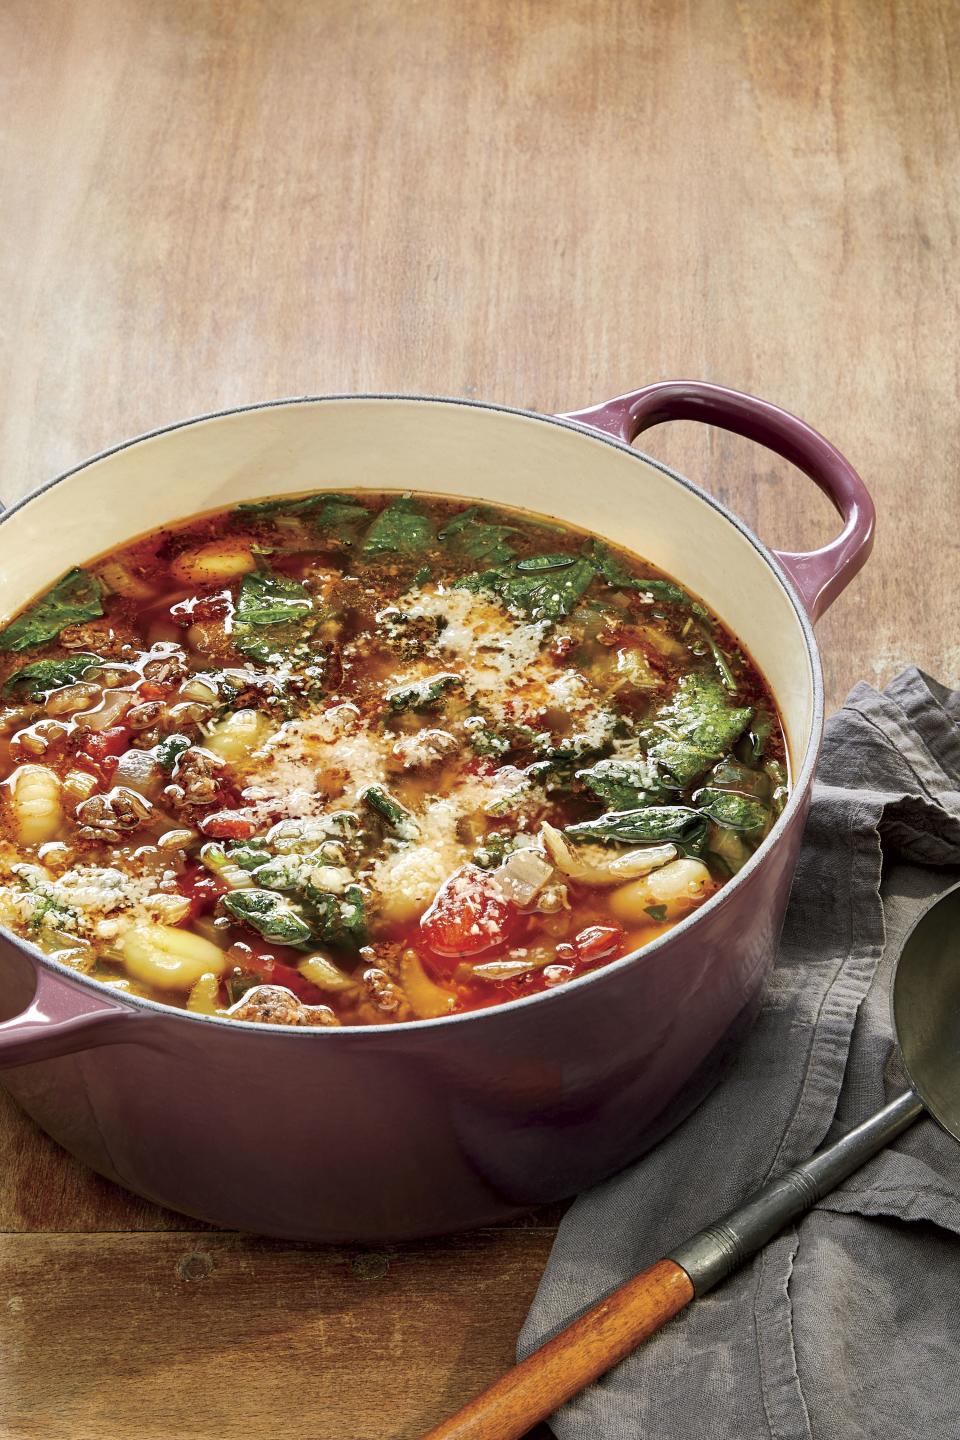 Beef-and-Vegetable Soup with Gnocchi